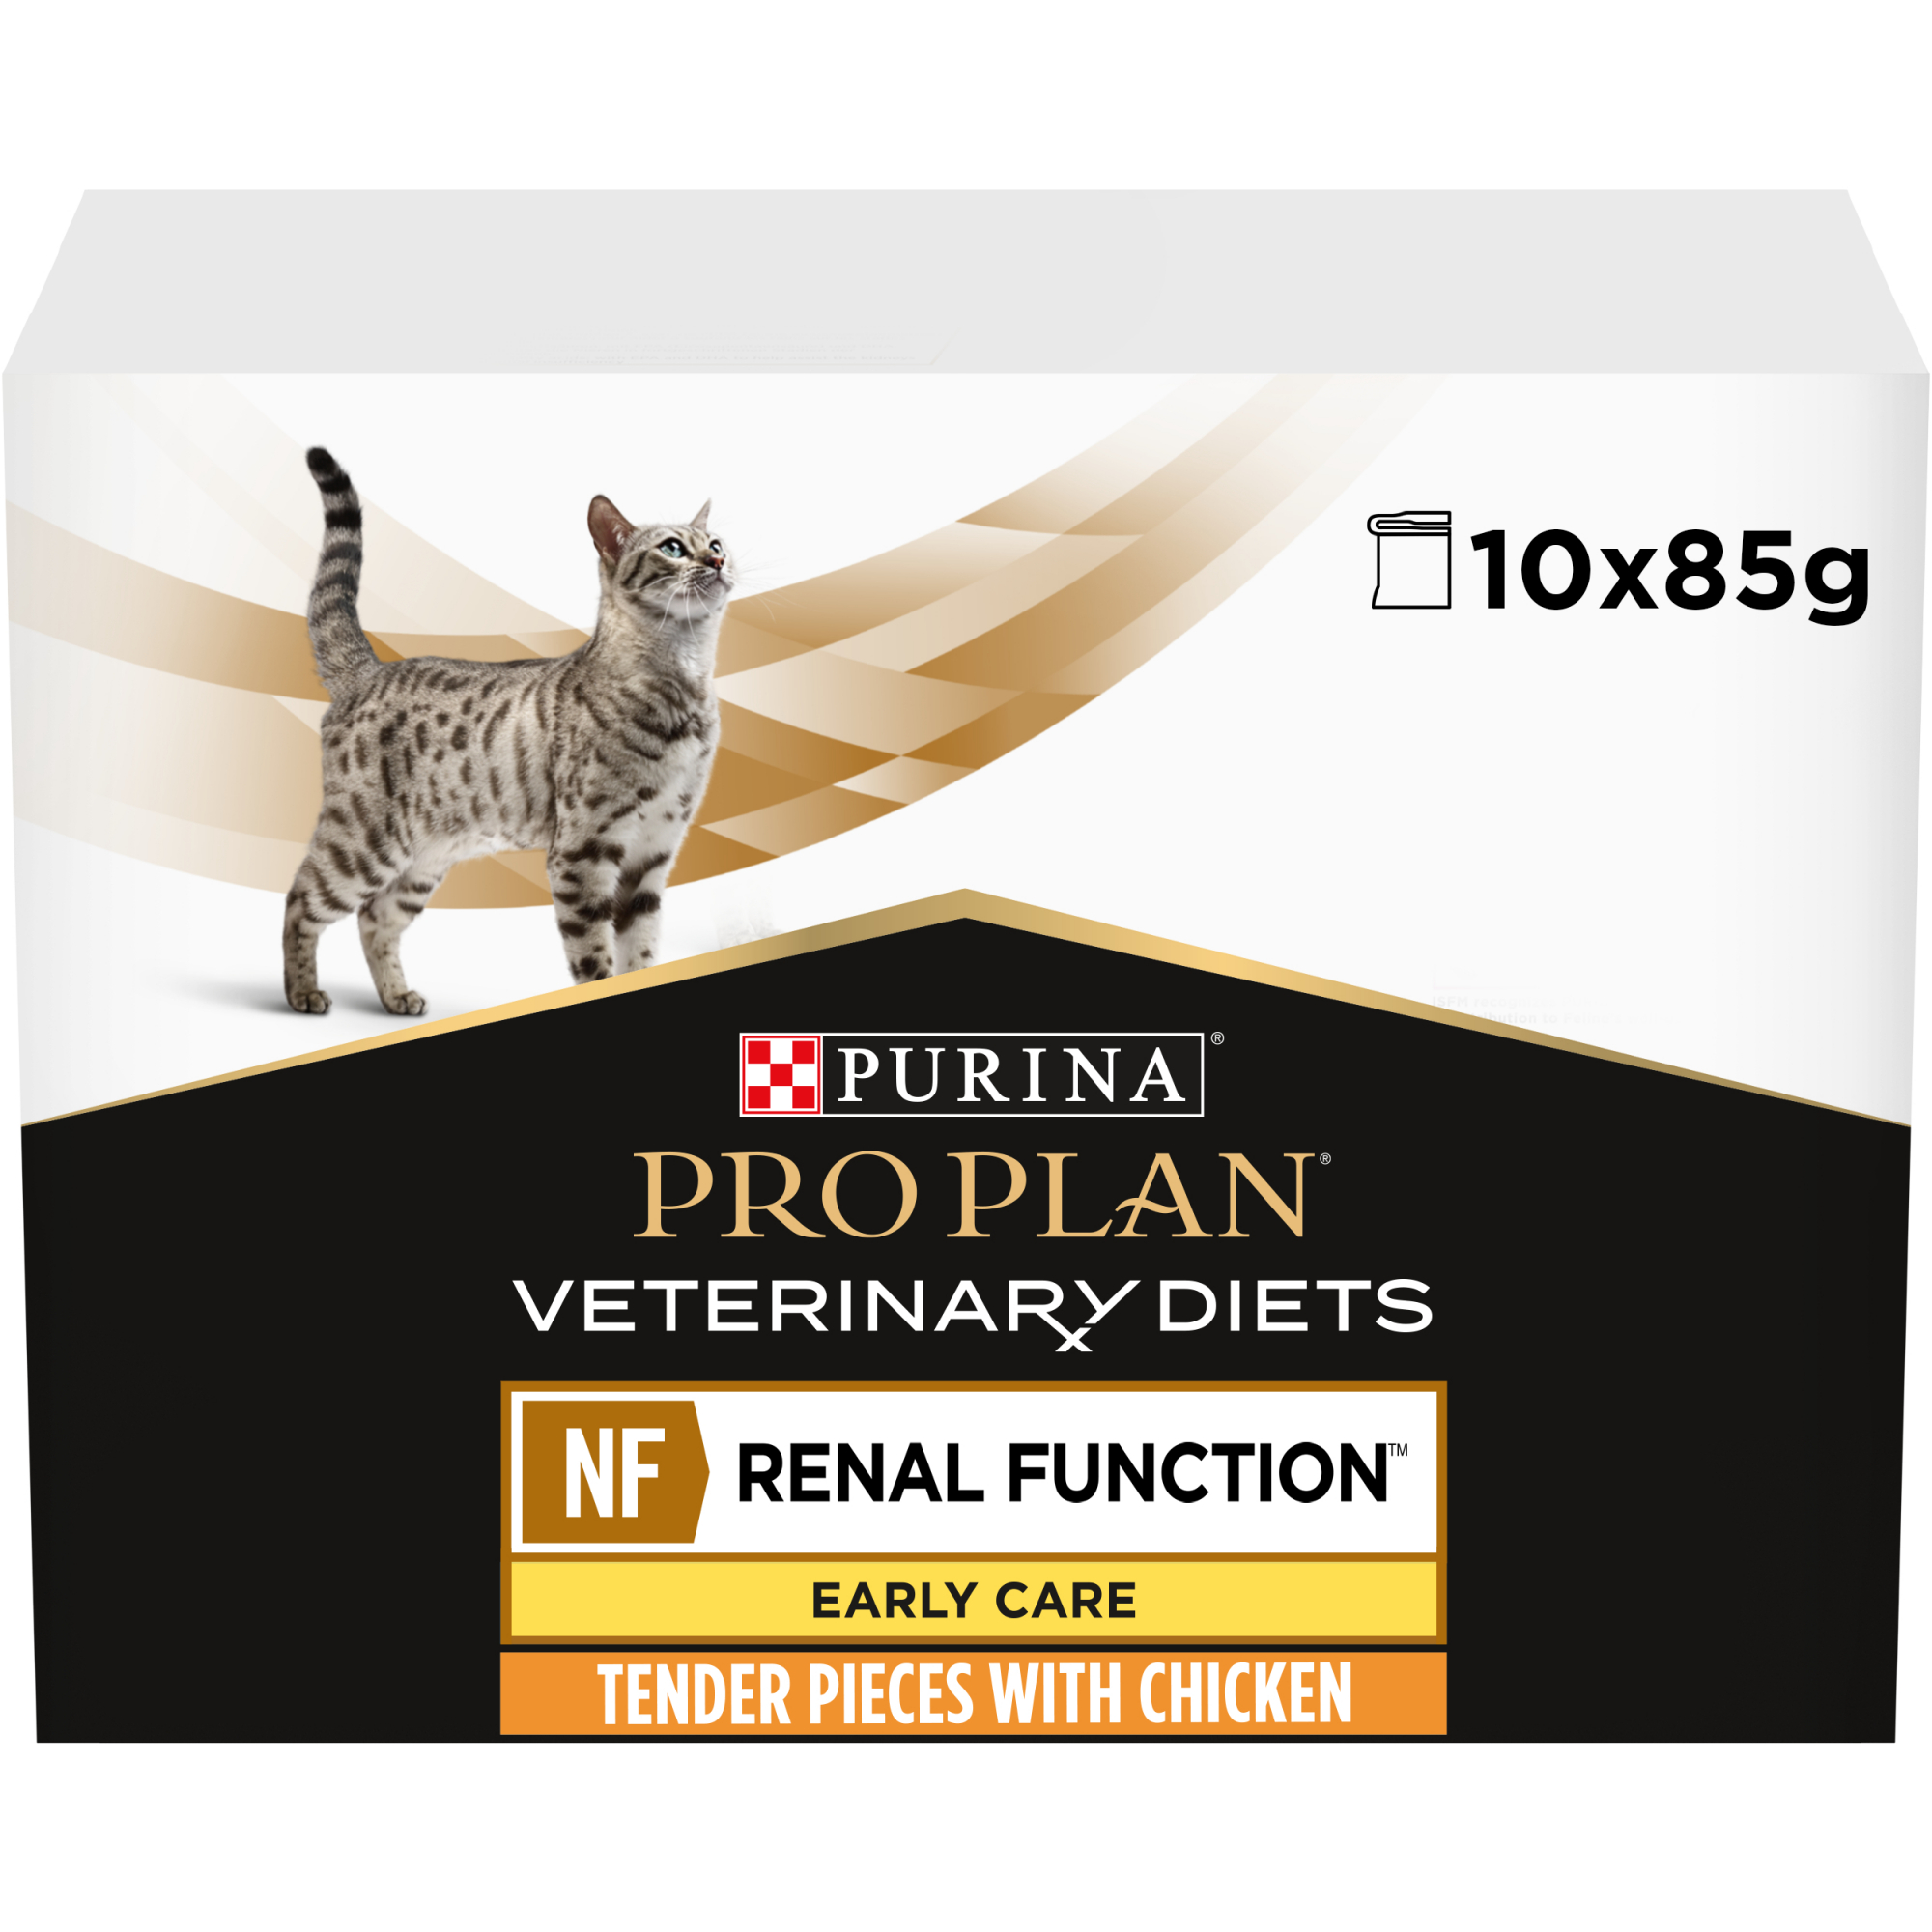 Purina Pro Plan Veterinary Diet NF Renal Function Early Care para gato